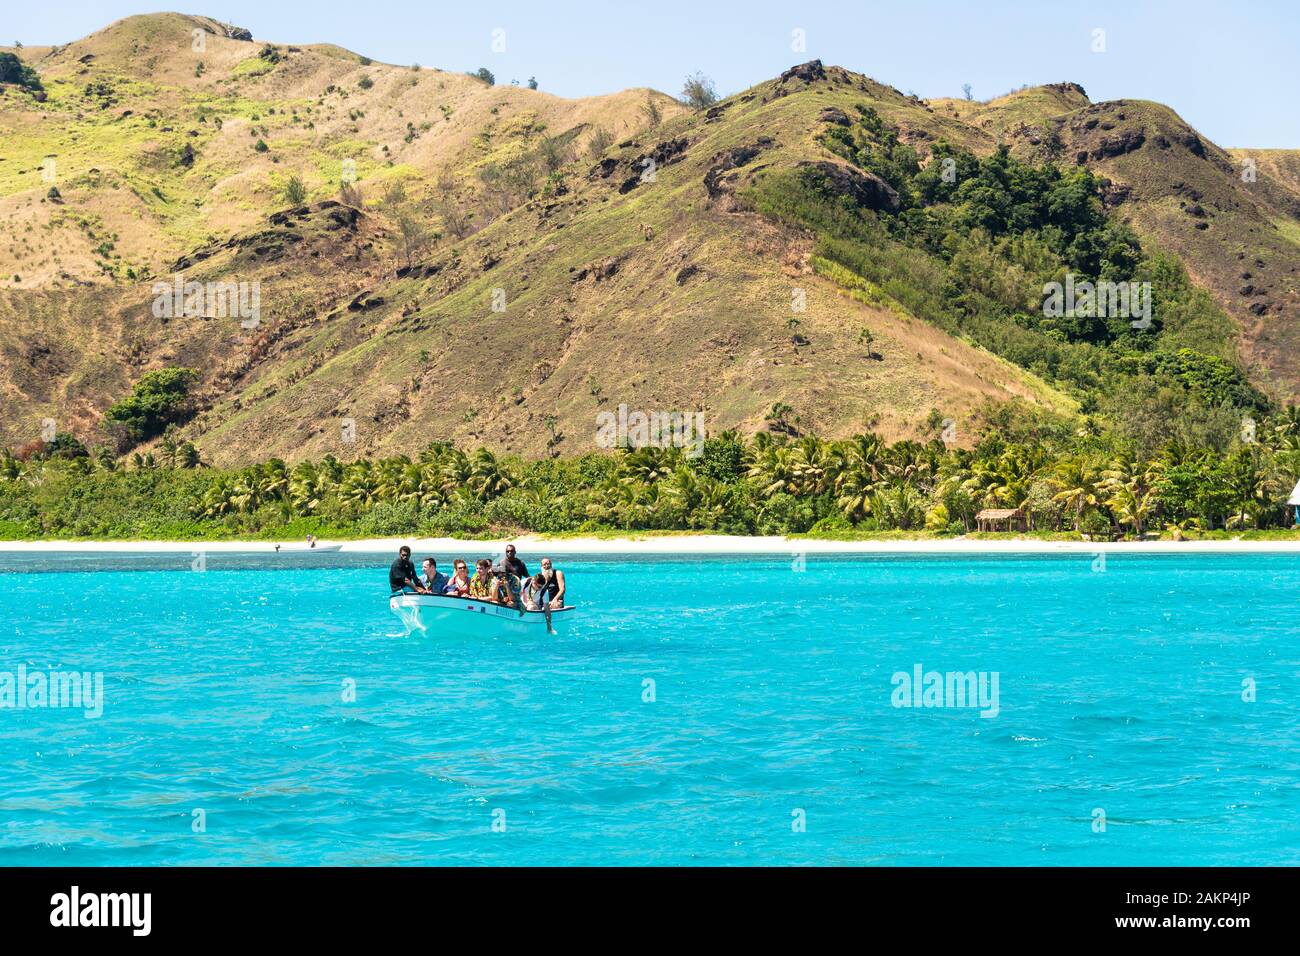 Yasawa, Fiji - September 24 2019: A boat carry tourists to another one leaving an idyllic island in Fiji in the south Pacific ocean Stock Photo